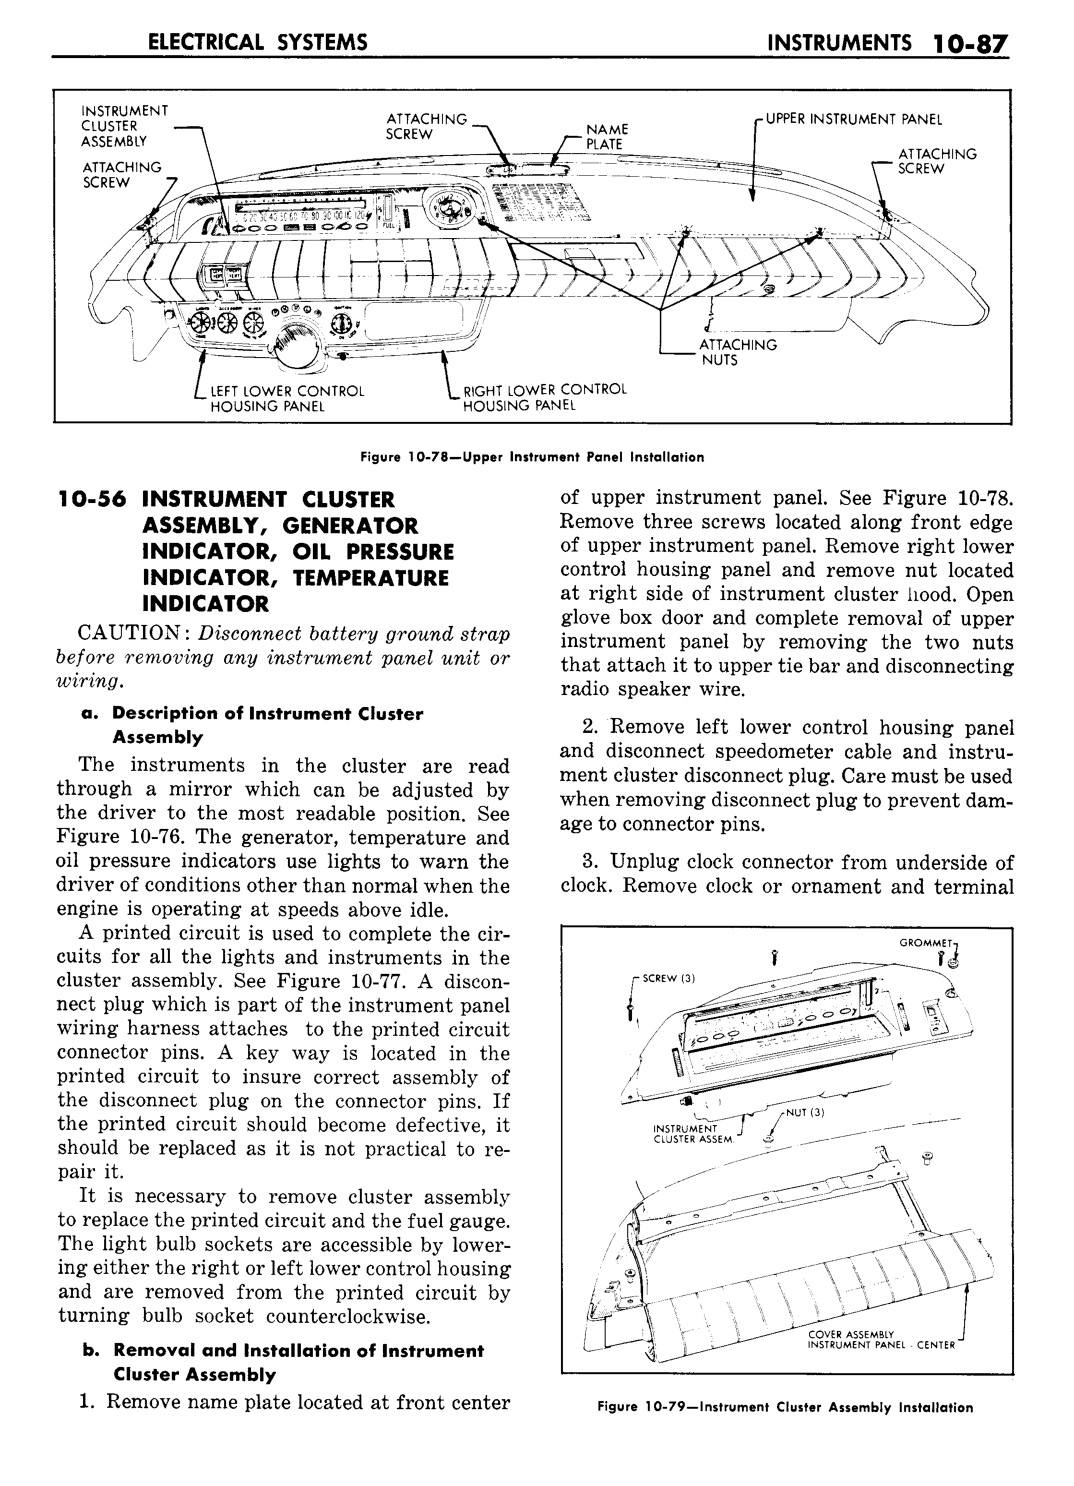 n_11 1960 Buick Shop Manual - Electrical Systems-087-087.jpg